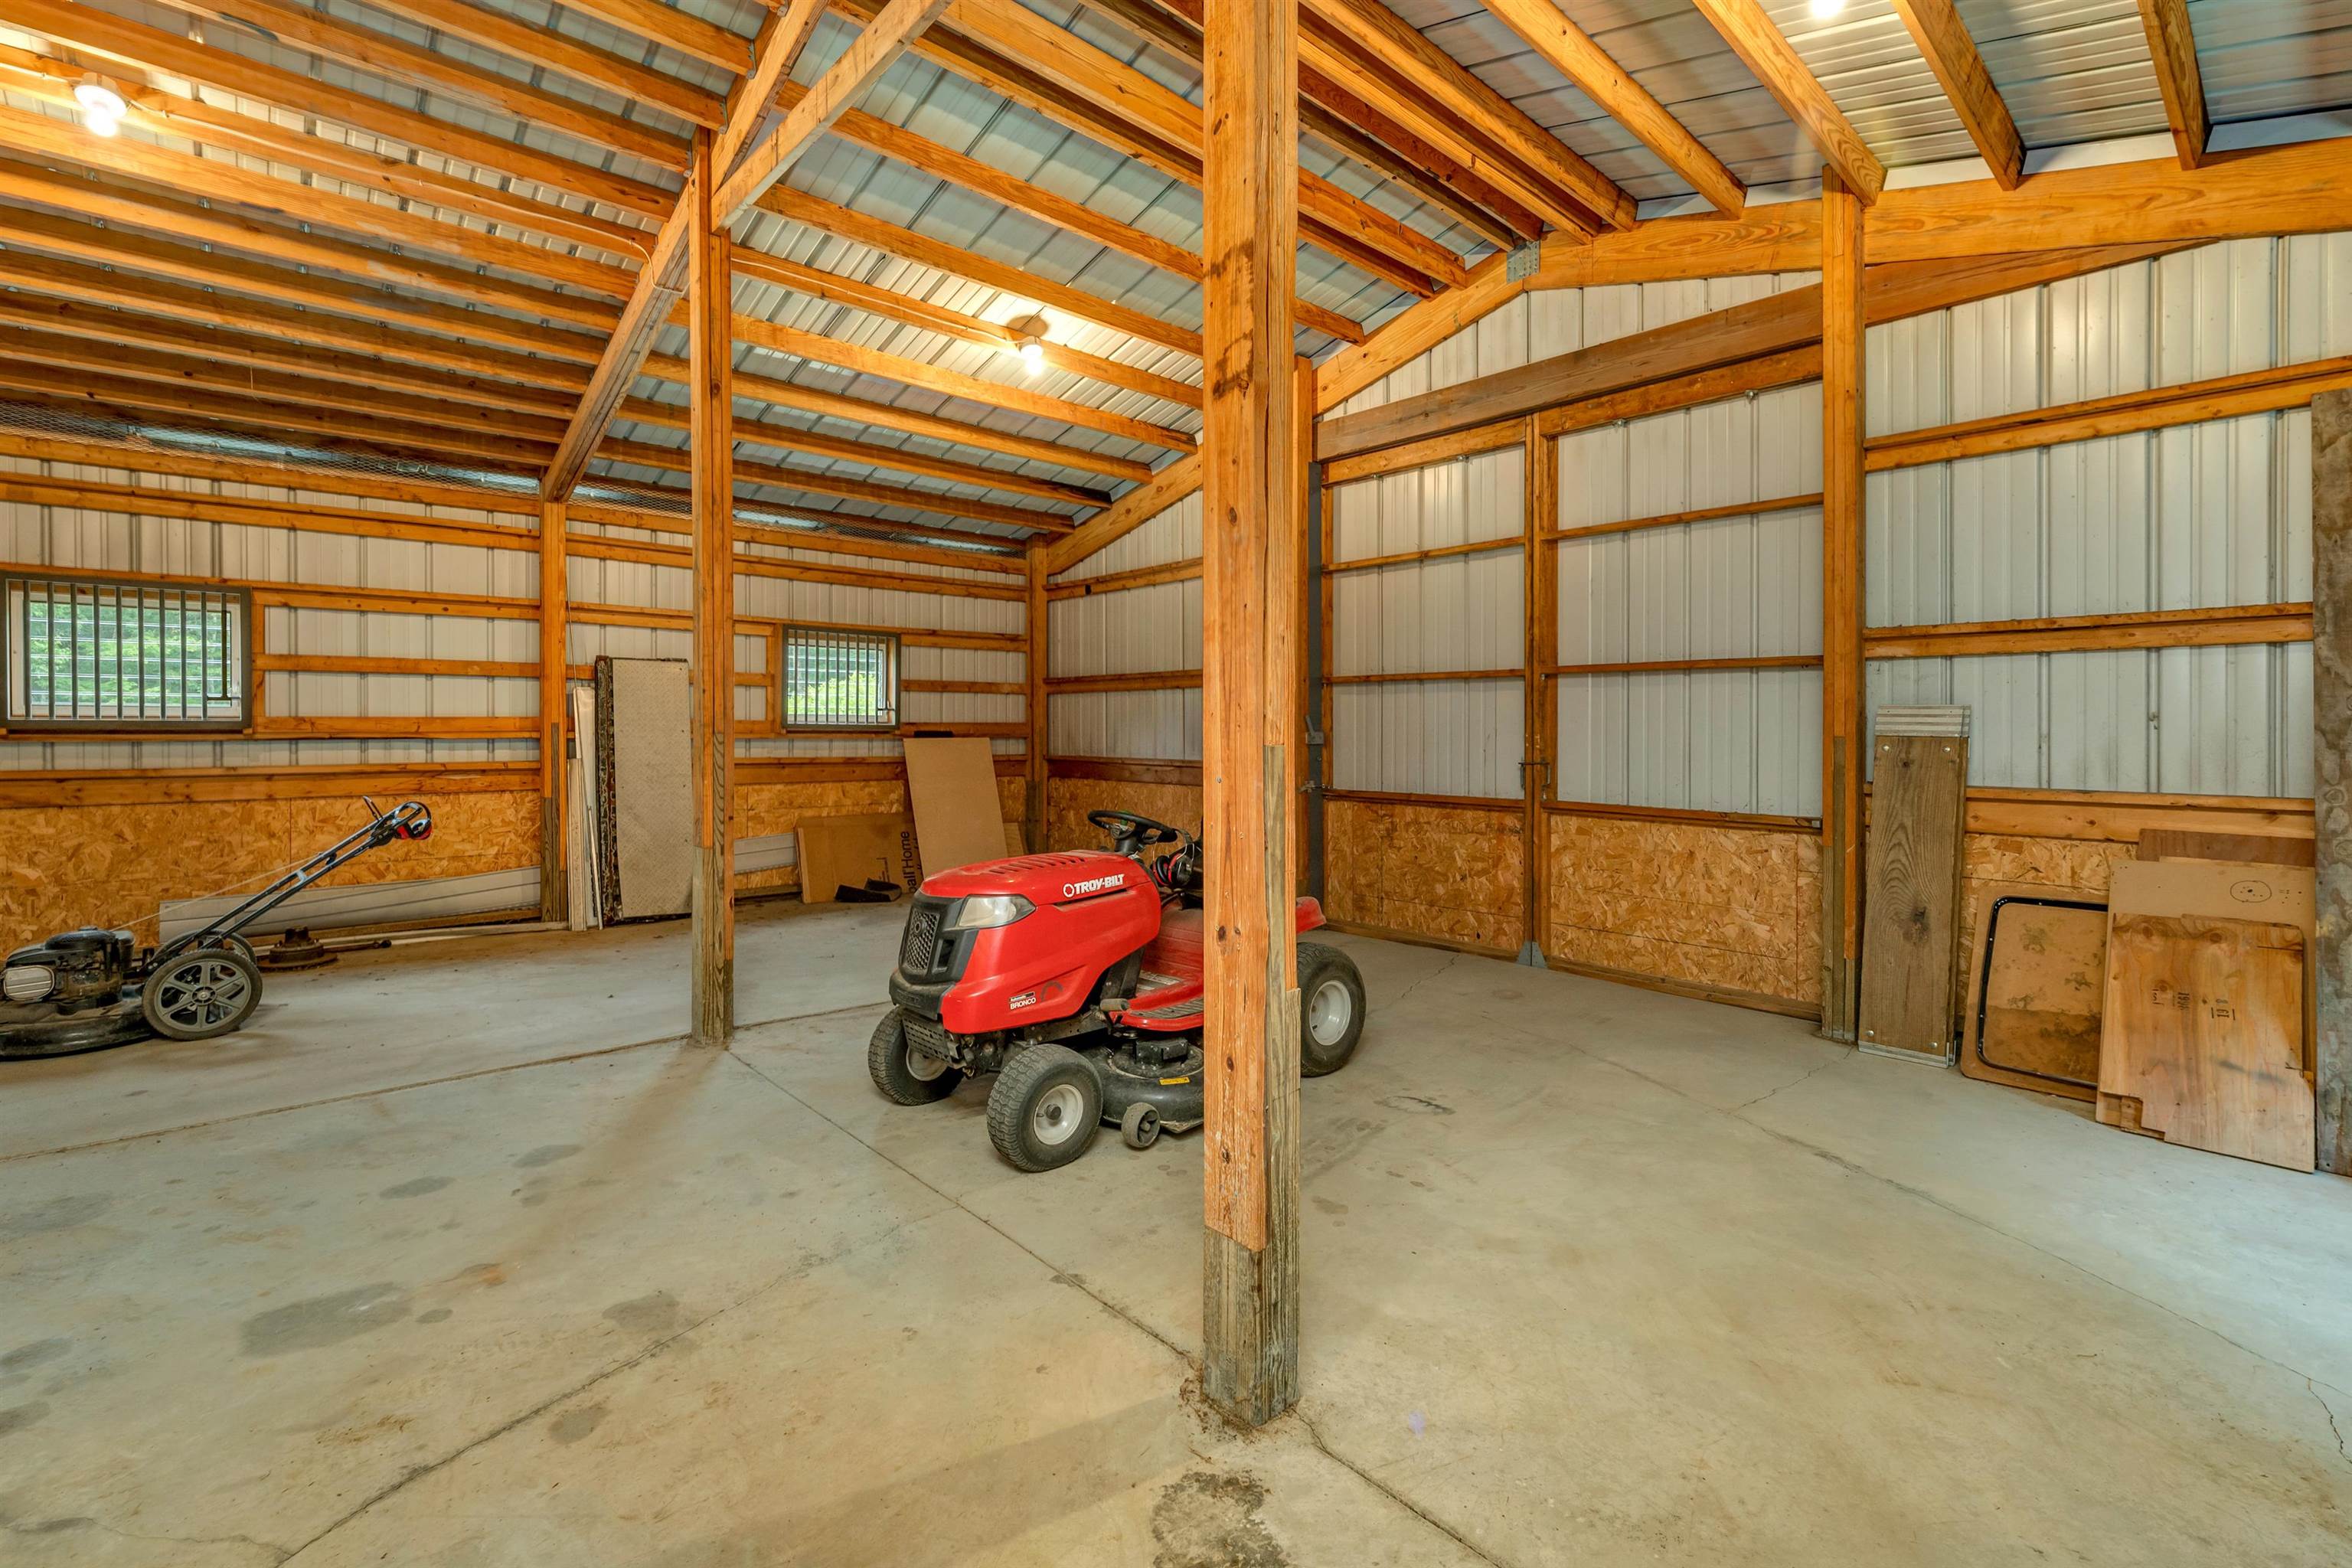 Can store cars or trucks in here.  Large slider door to pasture area.